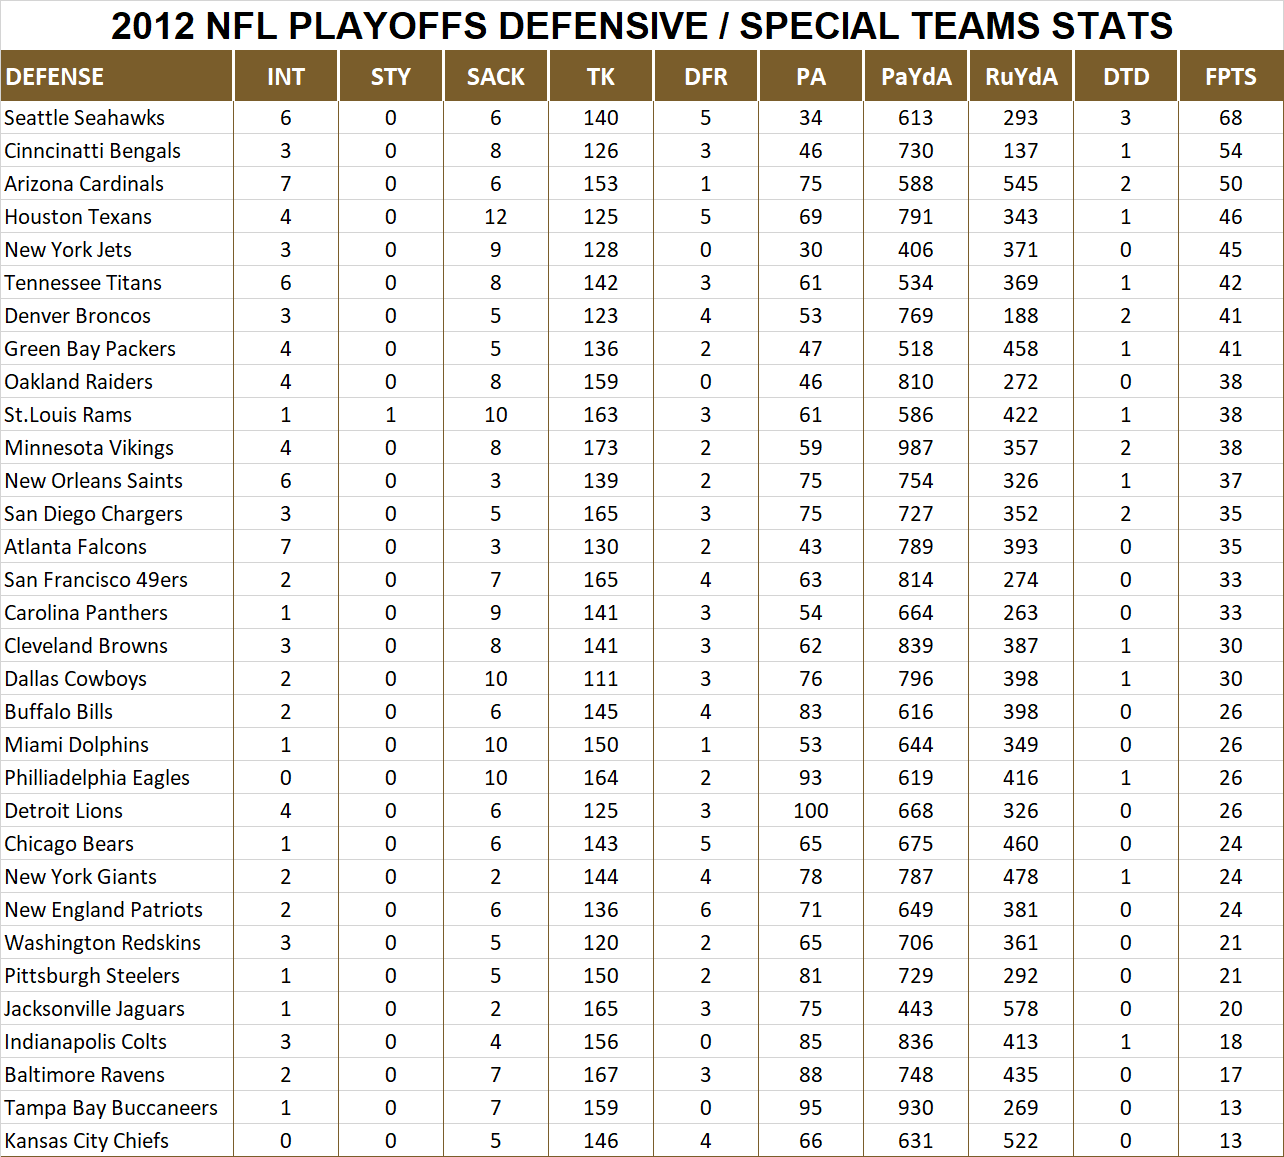 2012 National Football League Pool Playoff Player Defensive Stats